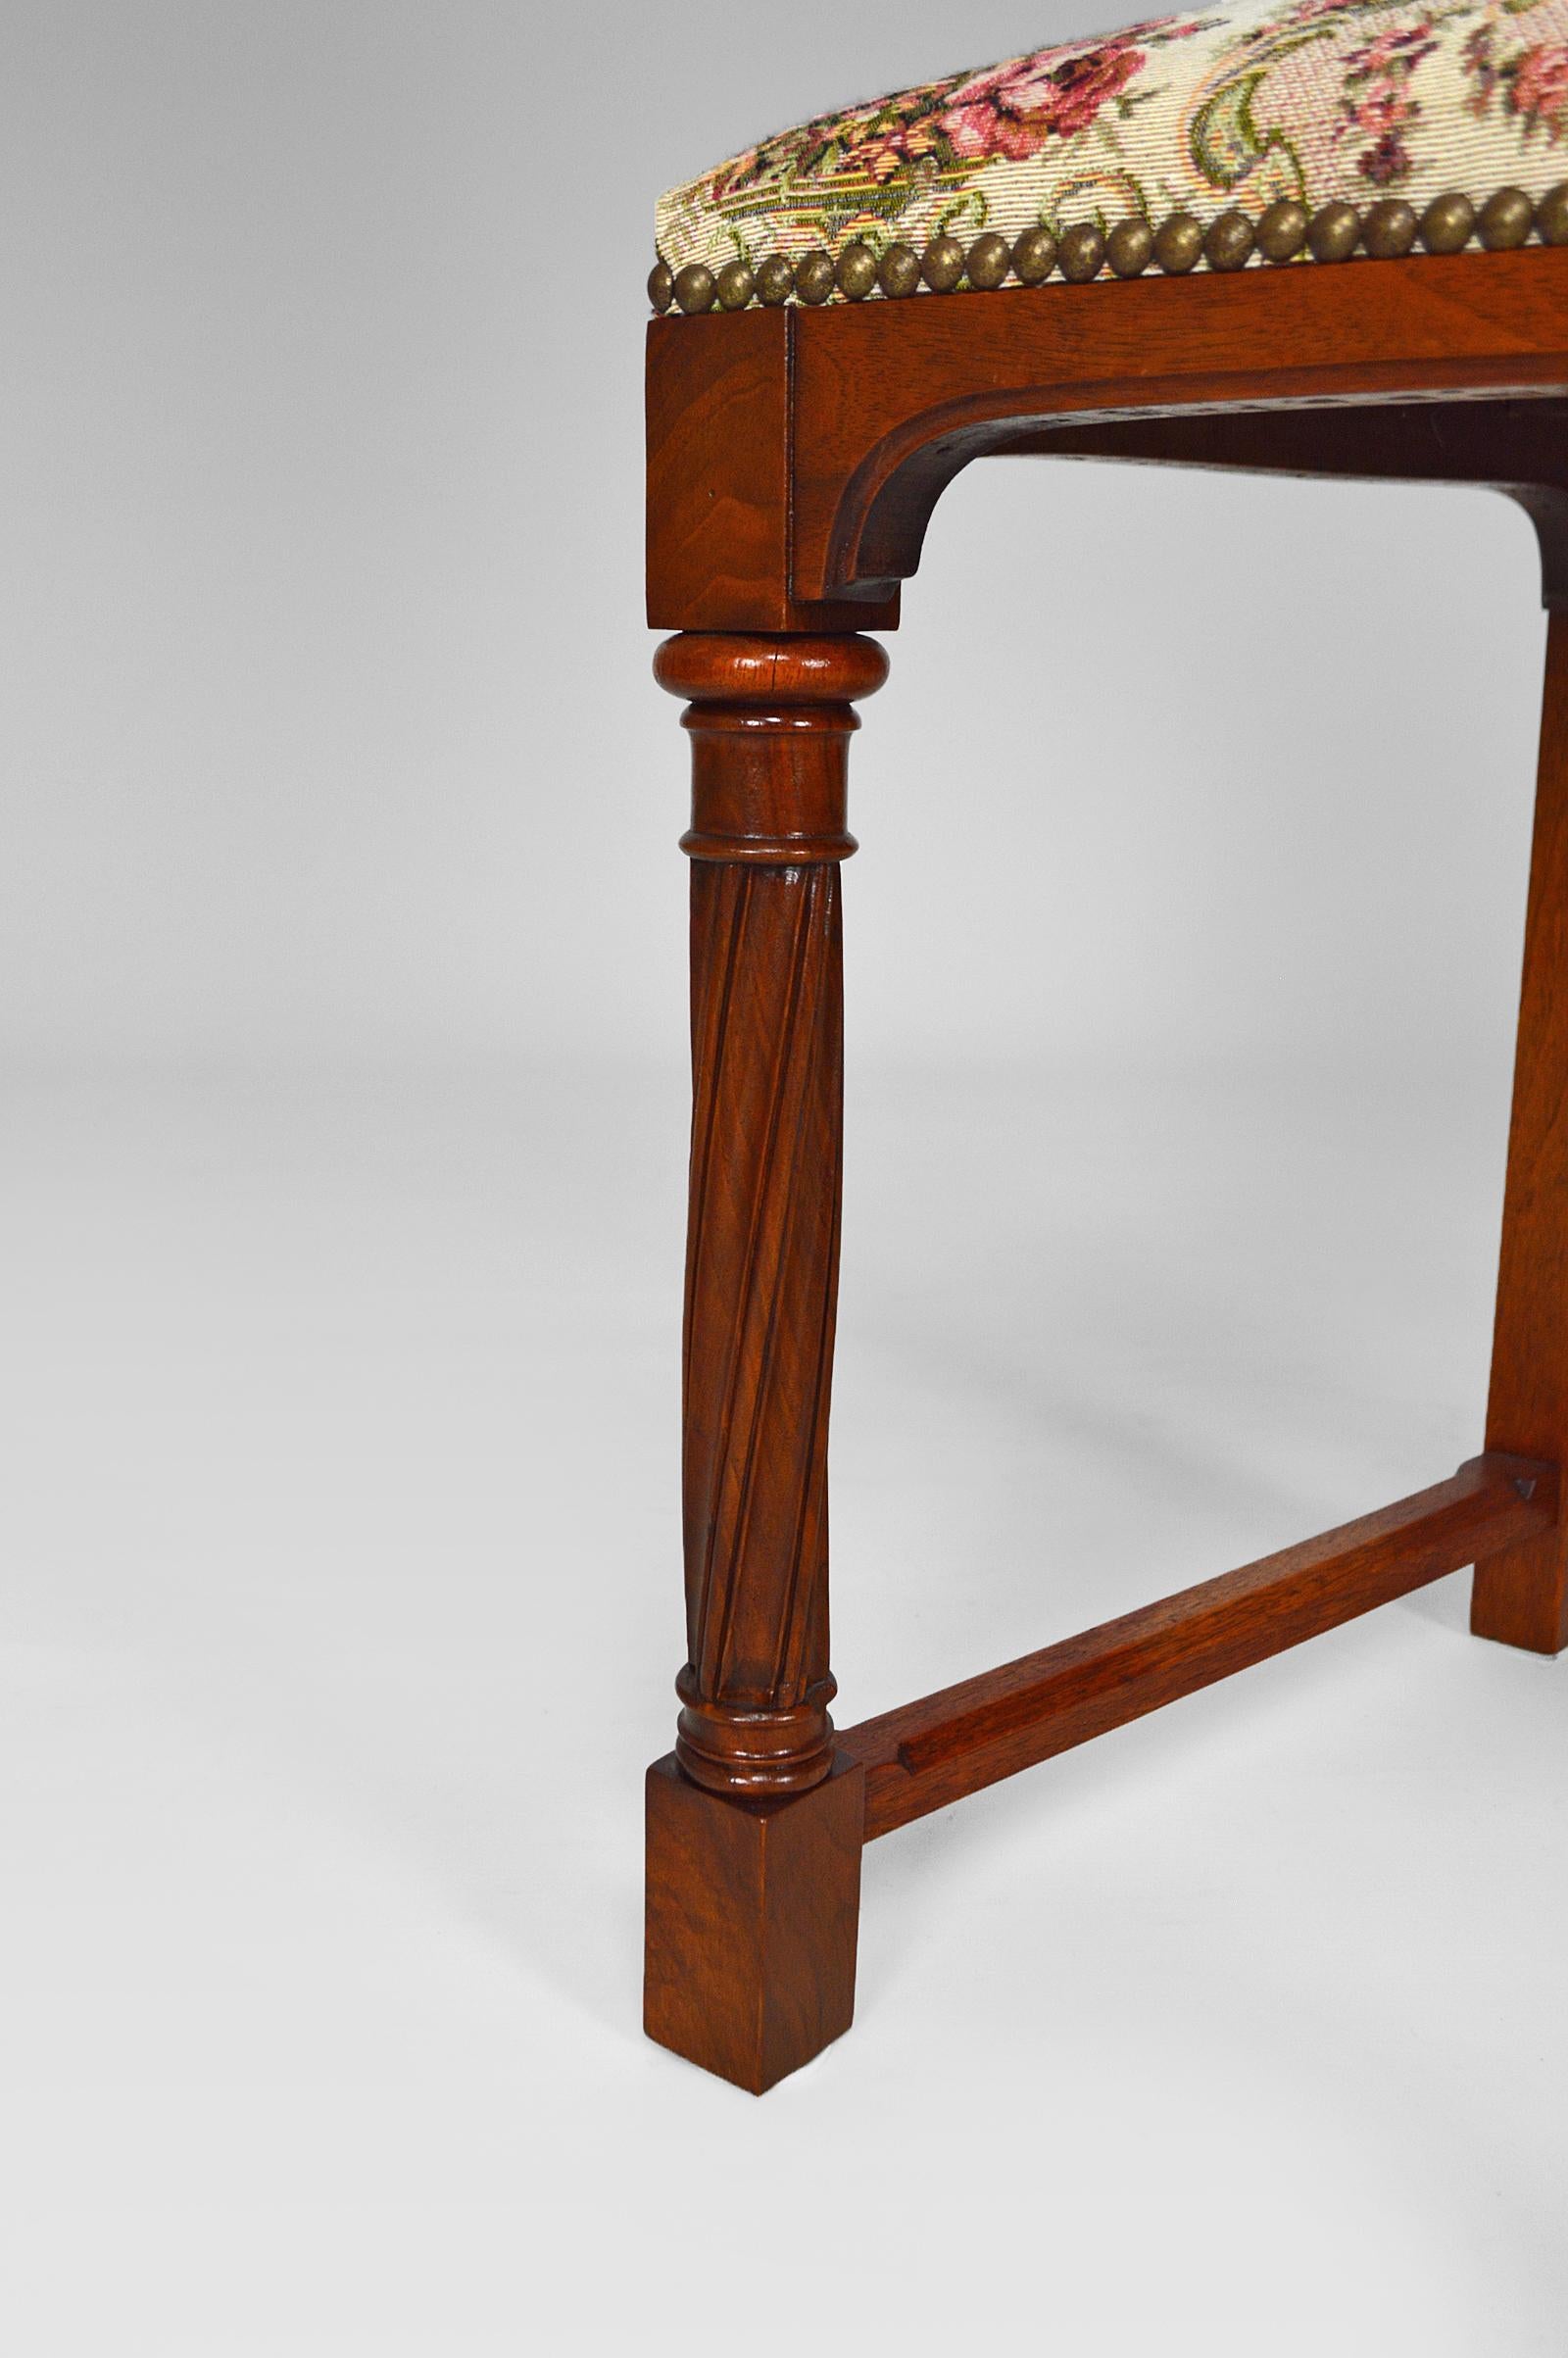 Pair of Antique Victorian Gothic Revival Chairs in Carved Walnut, 19th Century For Sale 12